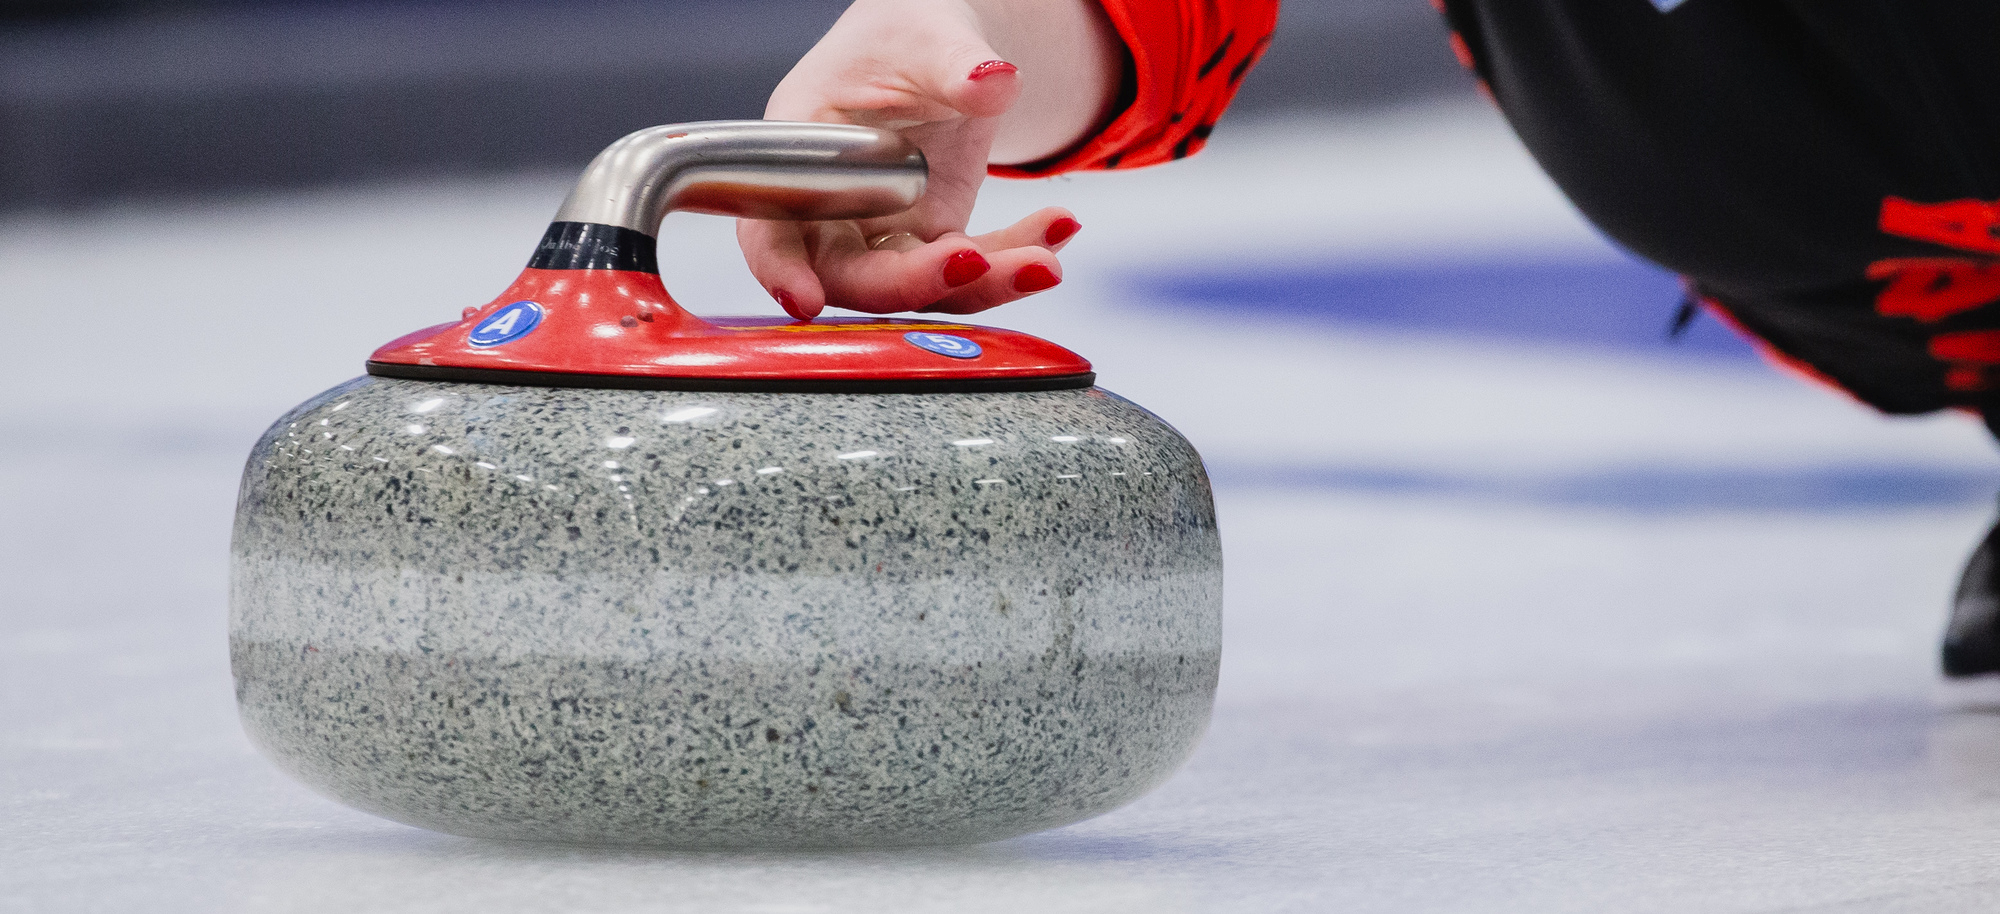 The World Curling Federation has surveyed its athletes on the number of ends in a game and the pace of play ©WCF/Céline Stucki